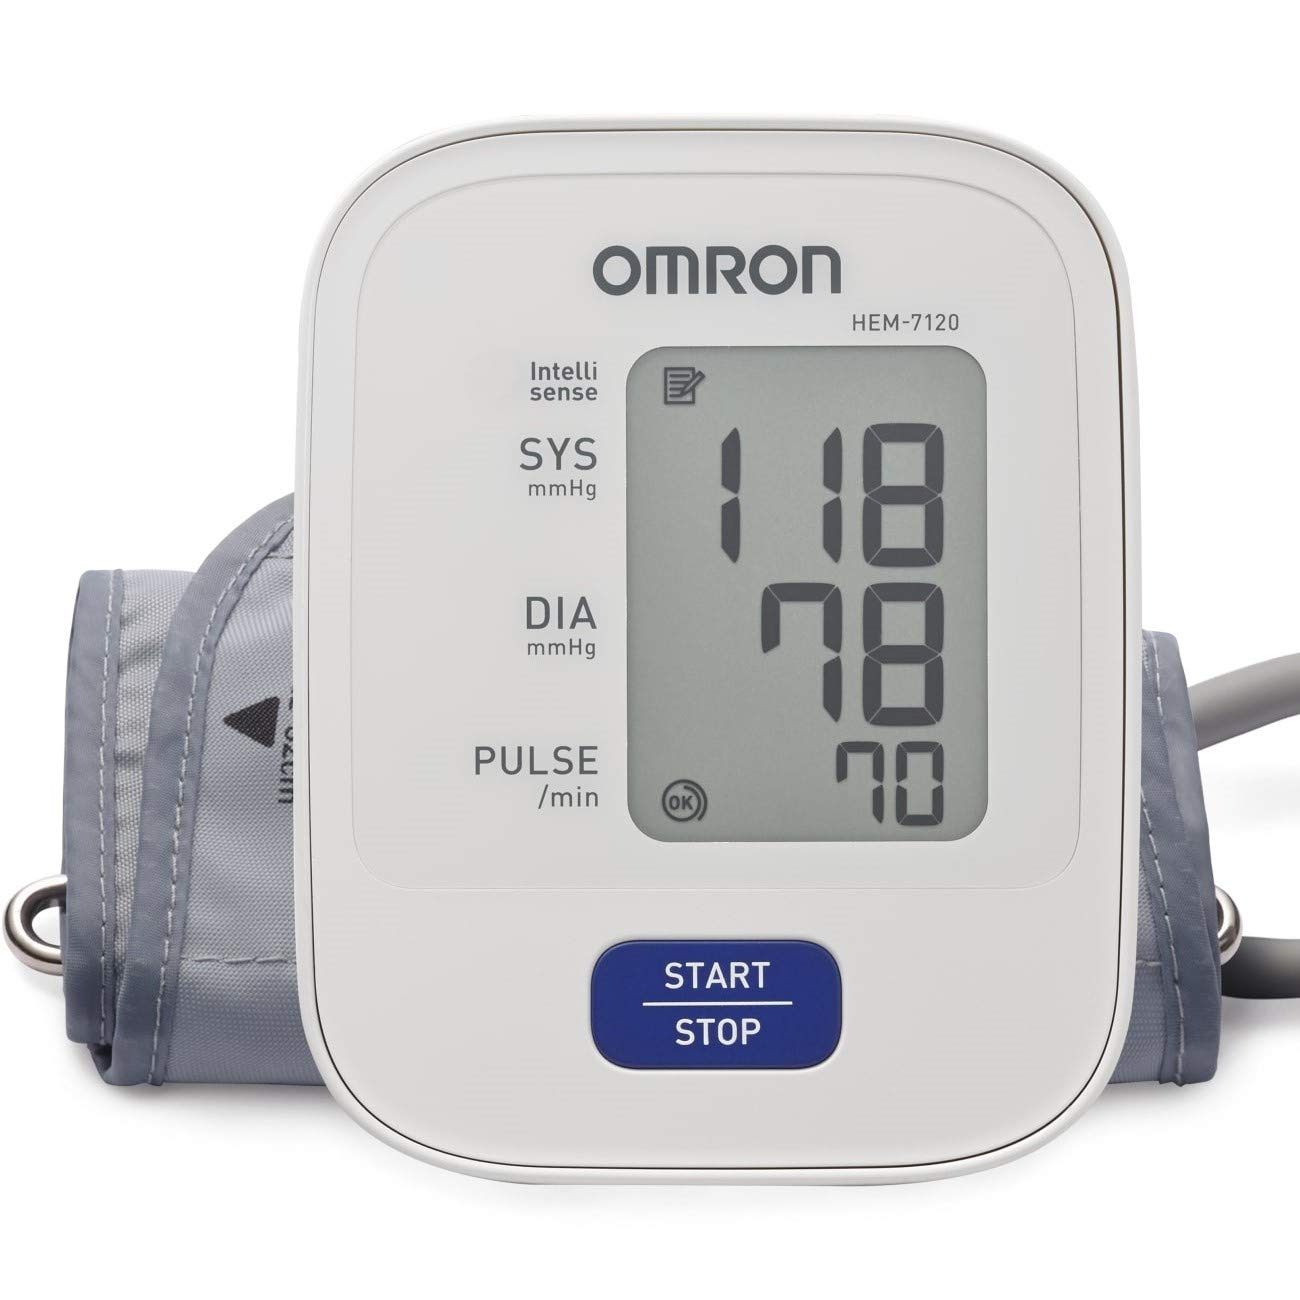 Buy OMRON Blood Pressure Monitor Wrist Automatic Electronic Blood Pressure  Monitor HEM-6163 from Japan - Buy authentic Plus exclusive items from Japan